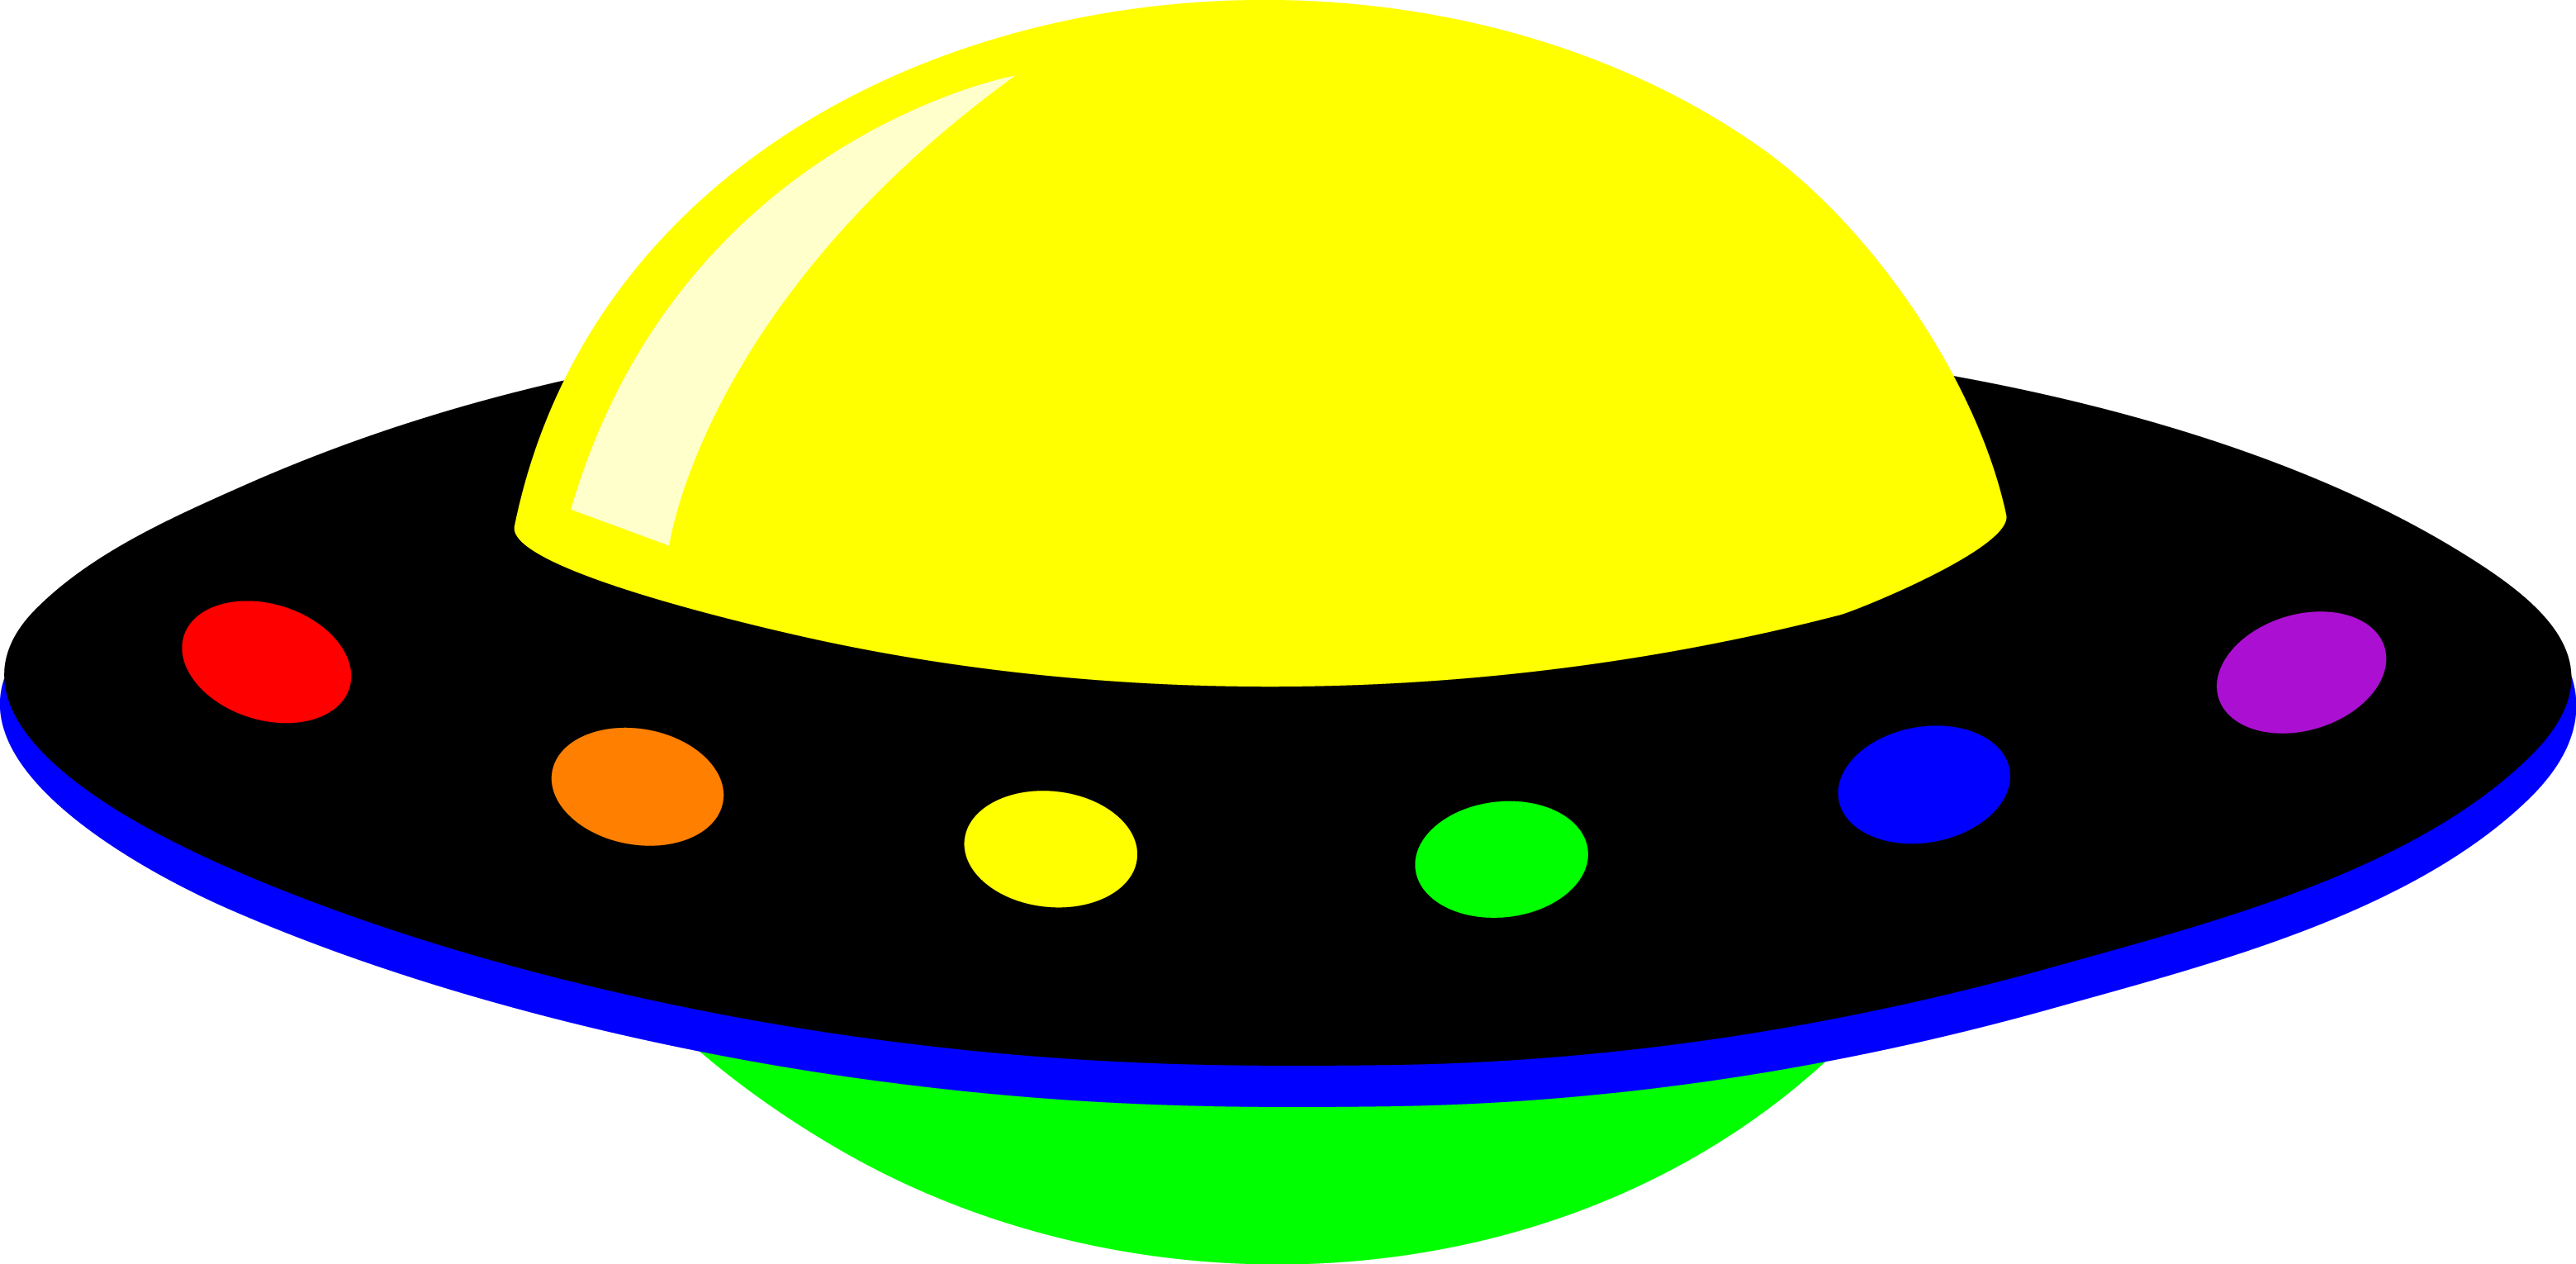 outer space clipart free - photo #10